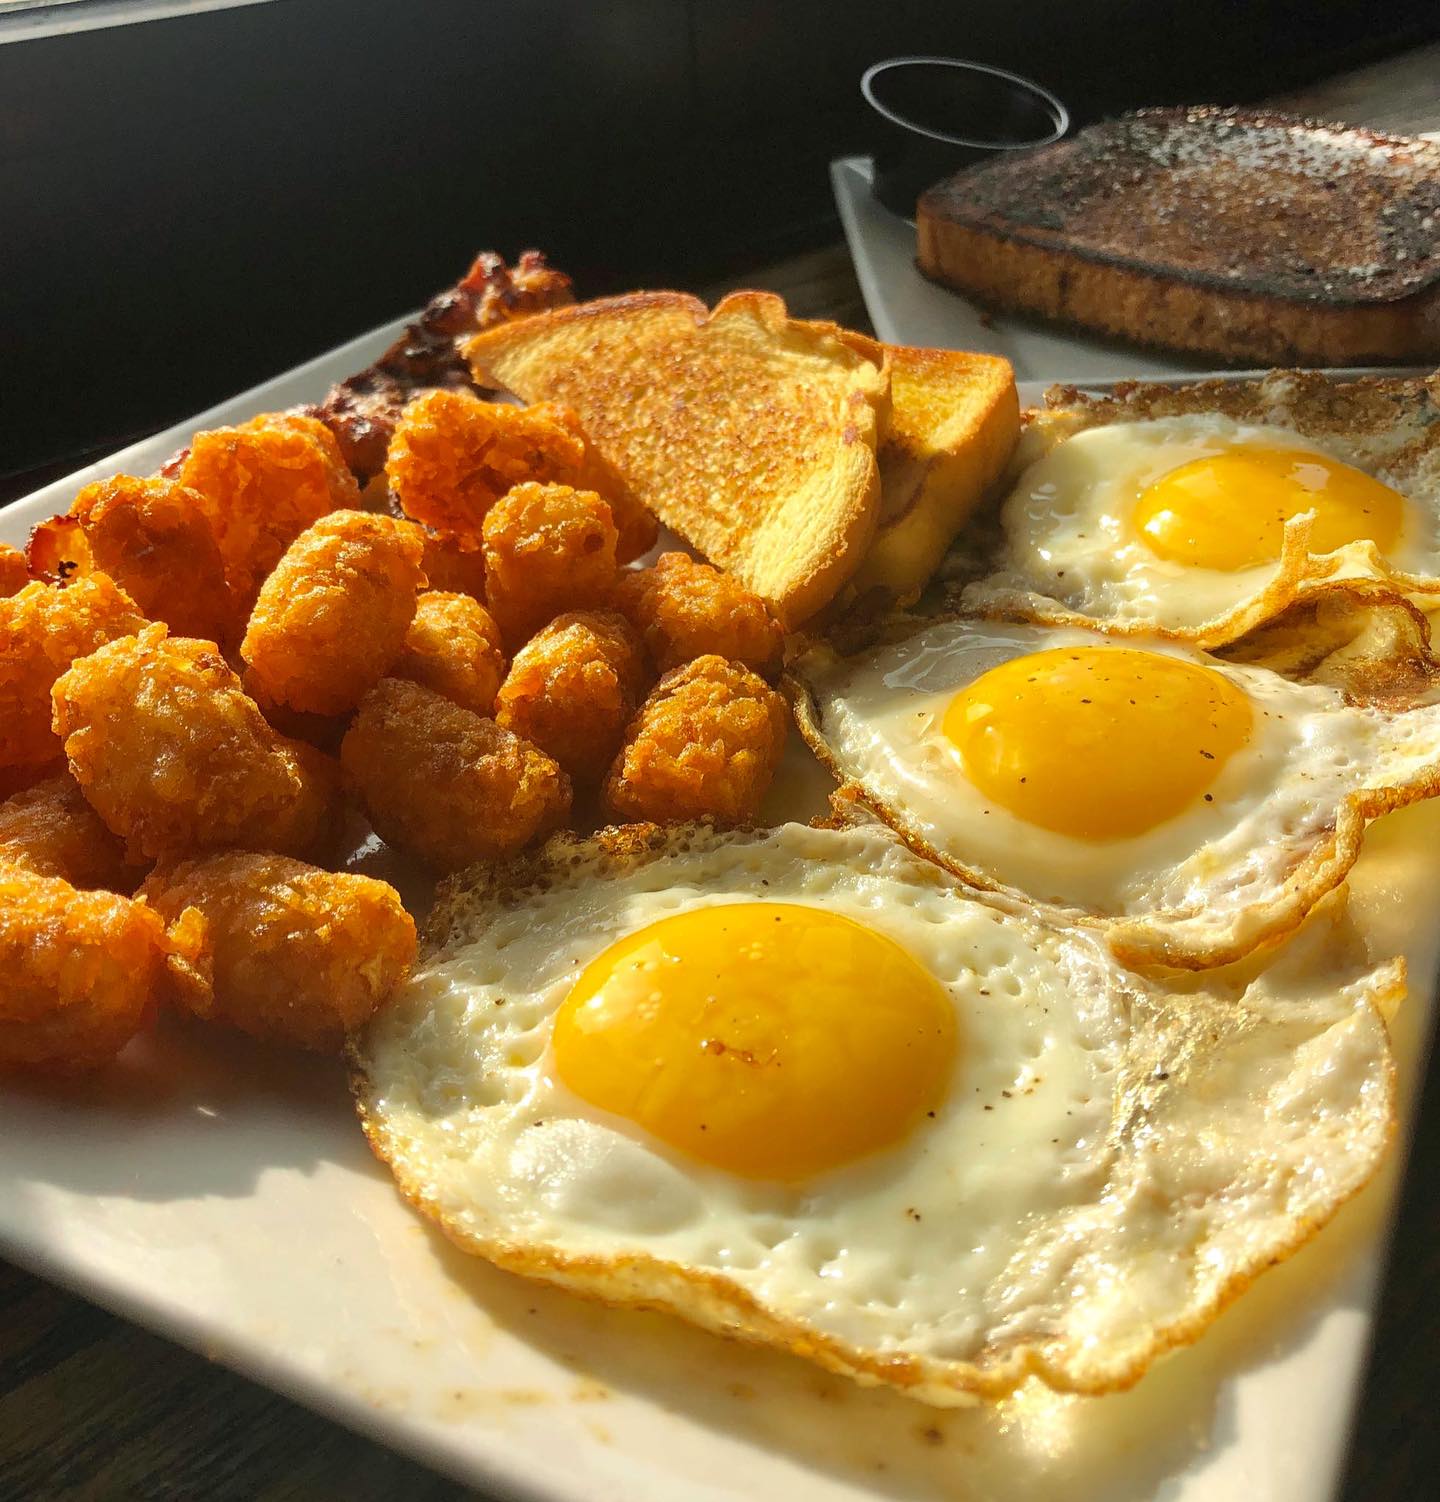 fried eggs, tater tots, toast, bacon, and french toast on a plate